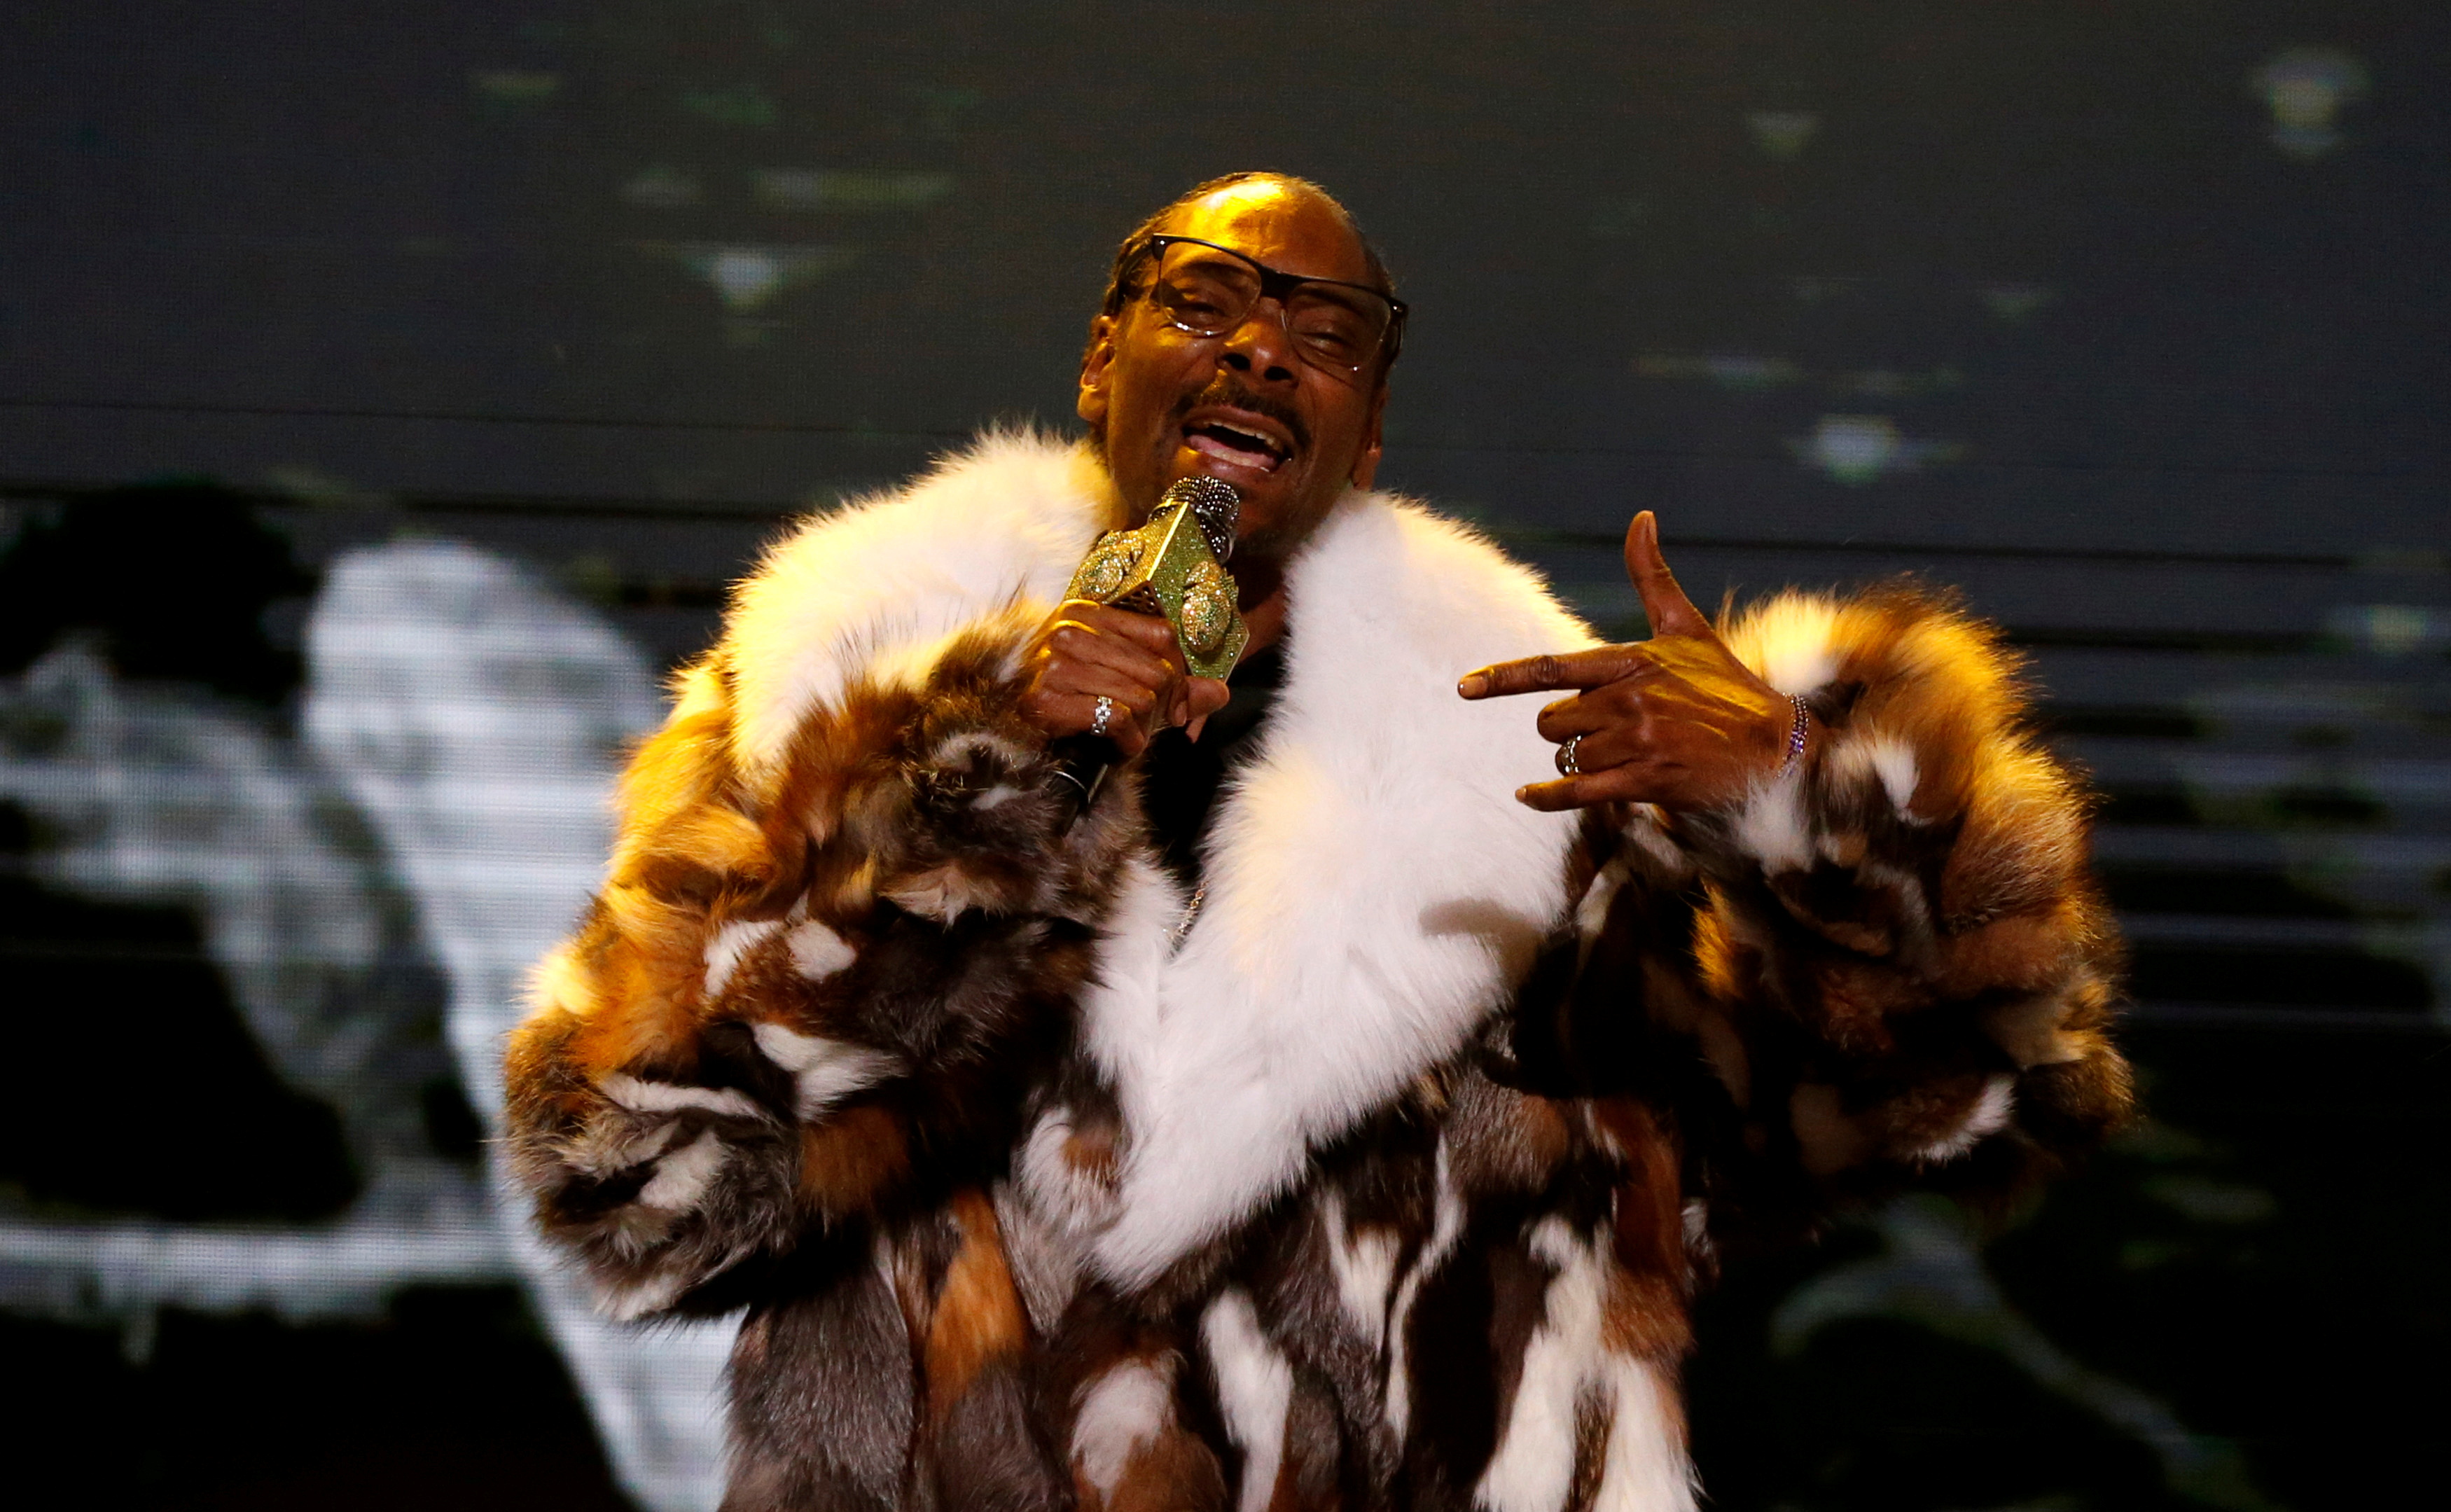 Rapper Snoop Dogg performs at the 6th annual REVOLT Global Spin Awards in Los Angeles